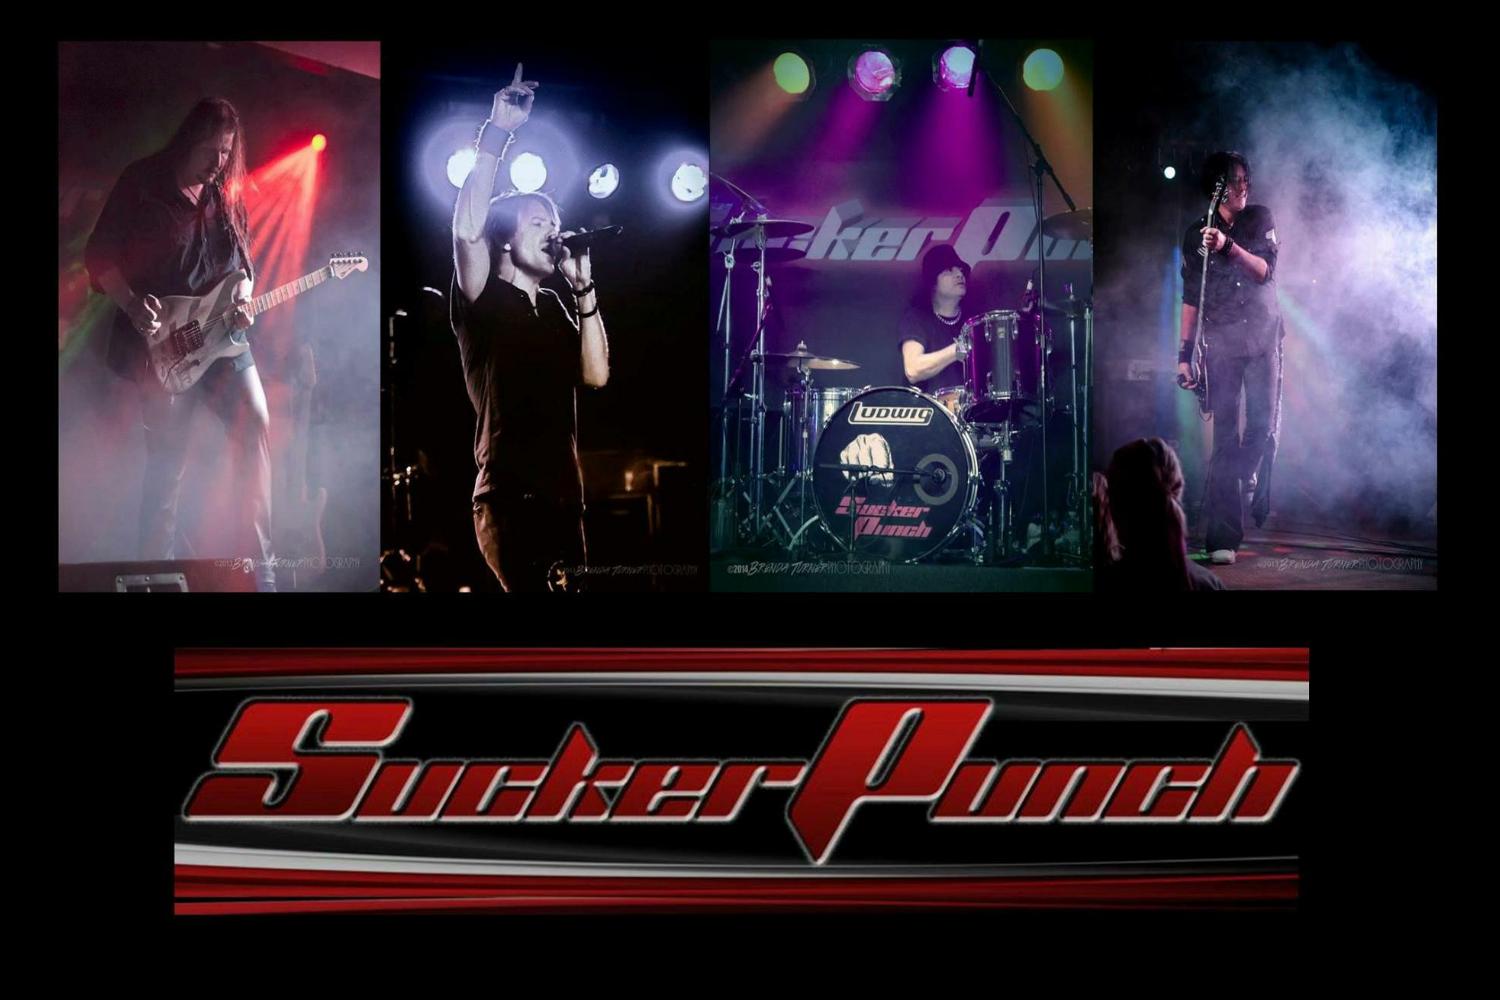 Live Music in Norfolk, Nebraska - SuckerPunch performing live at the Phoenix Room located in the east room of The Depot in Norfolk, NE